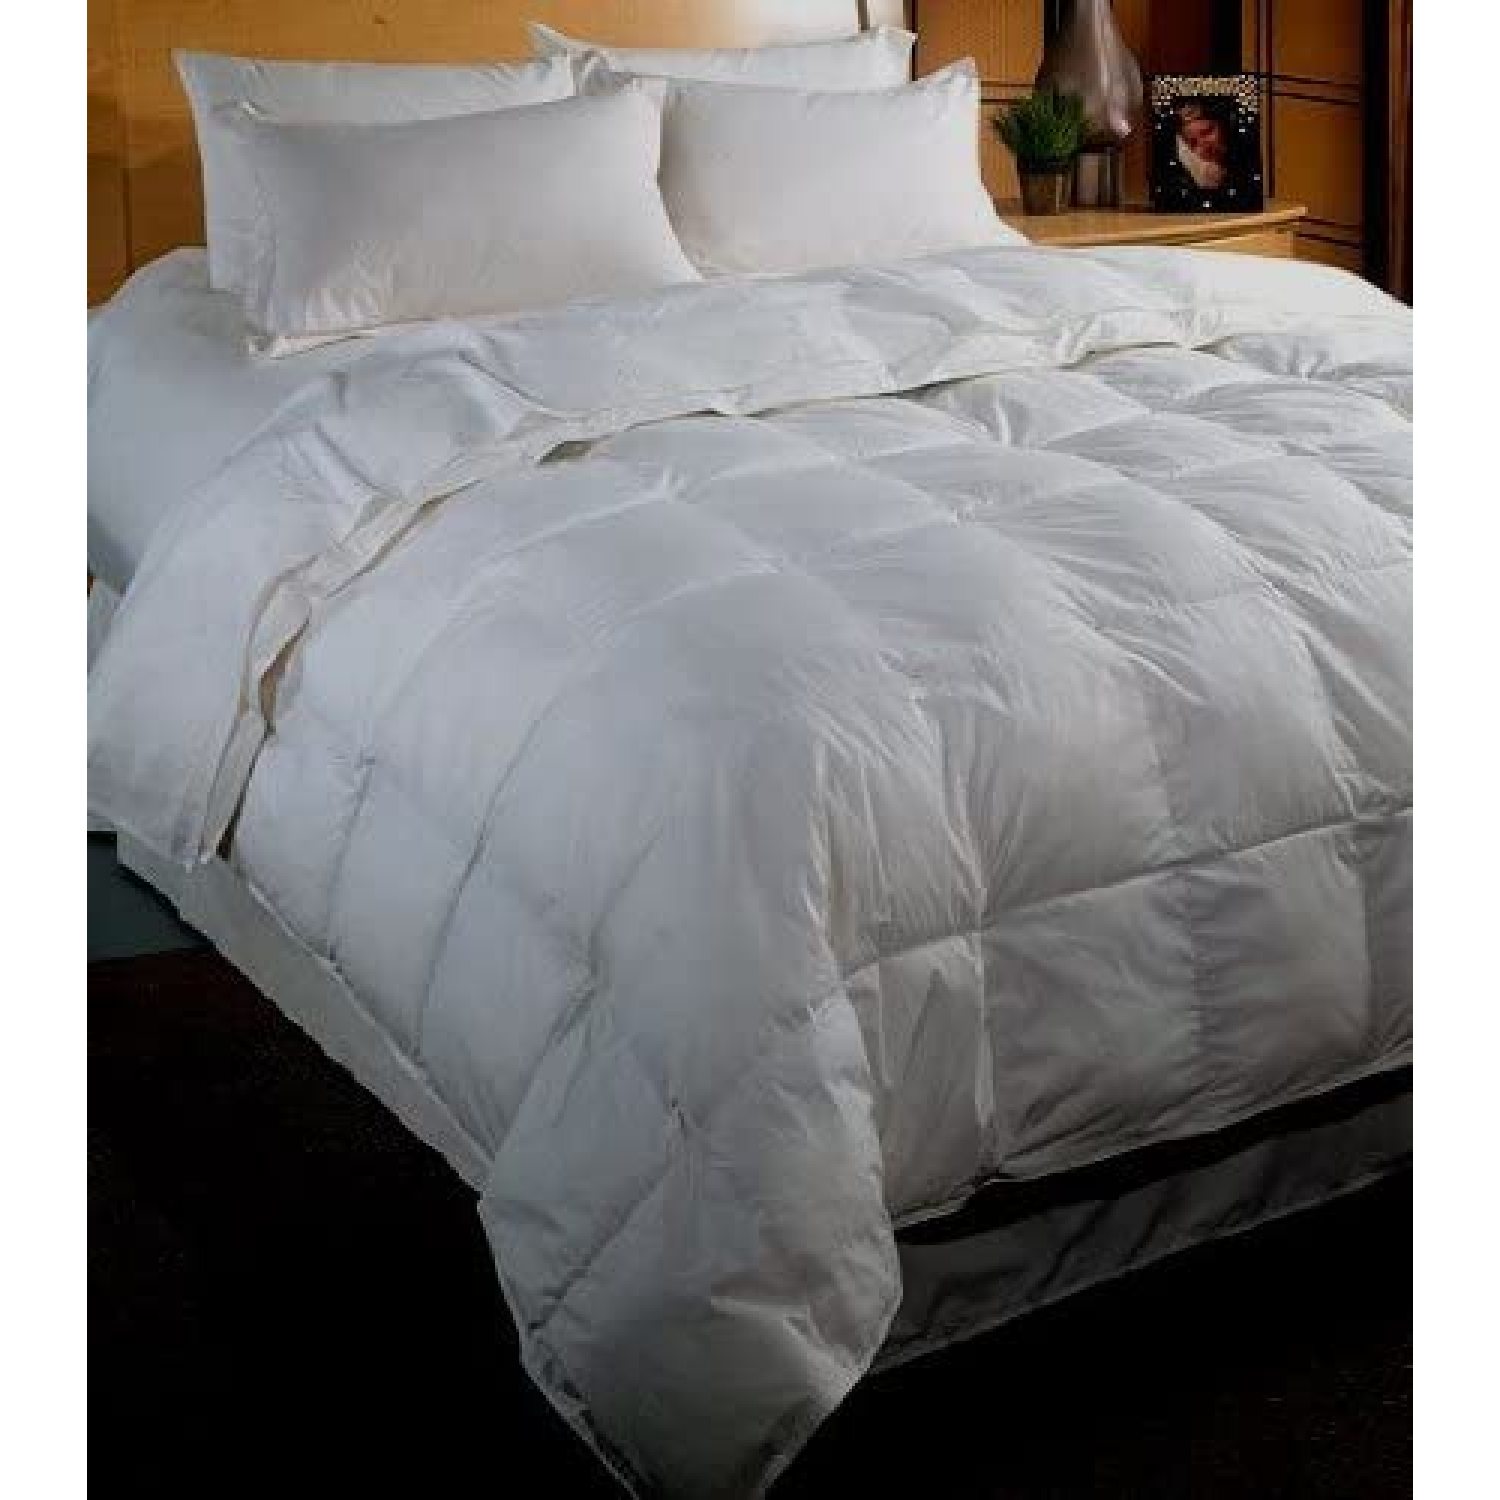 White Down Alternative Comforter - Duvet Cover Insert - Queen Size (90x90 inches), Royal Tradition Brand - image 1 of 1